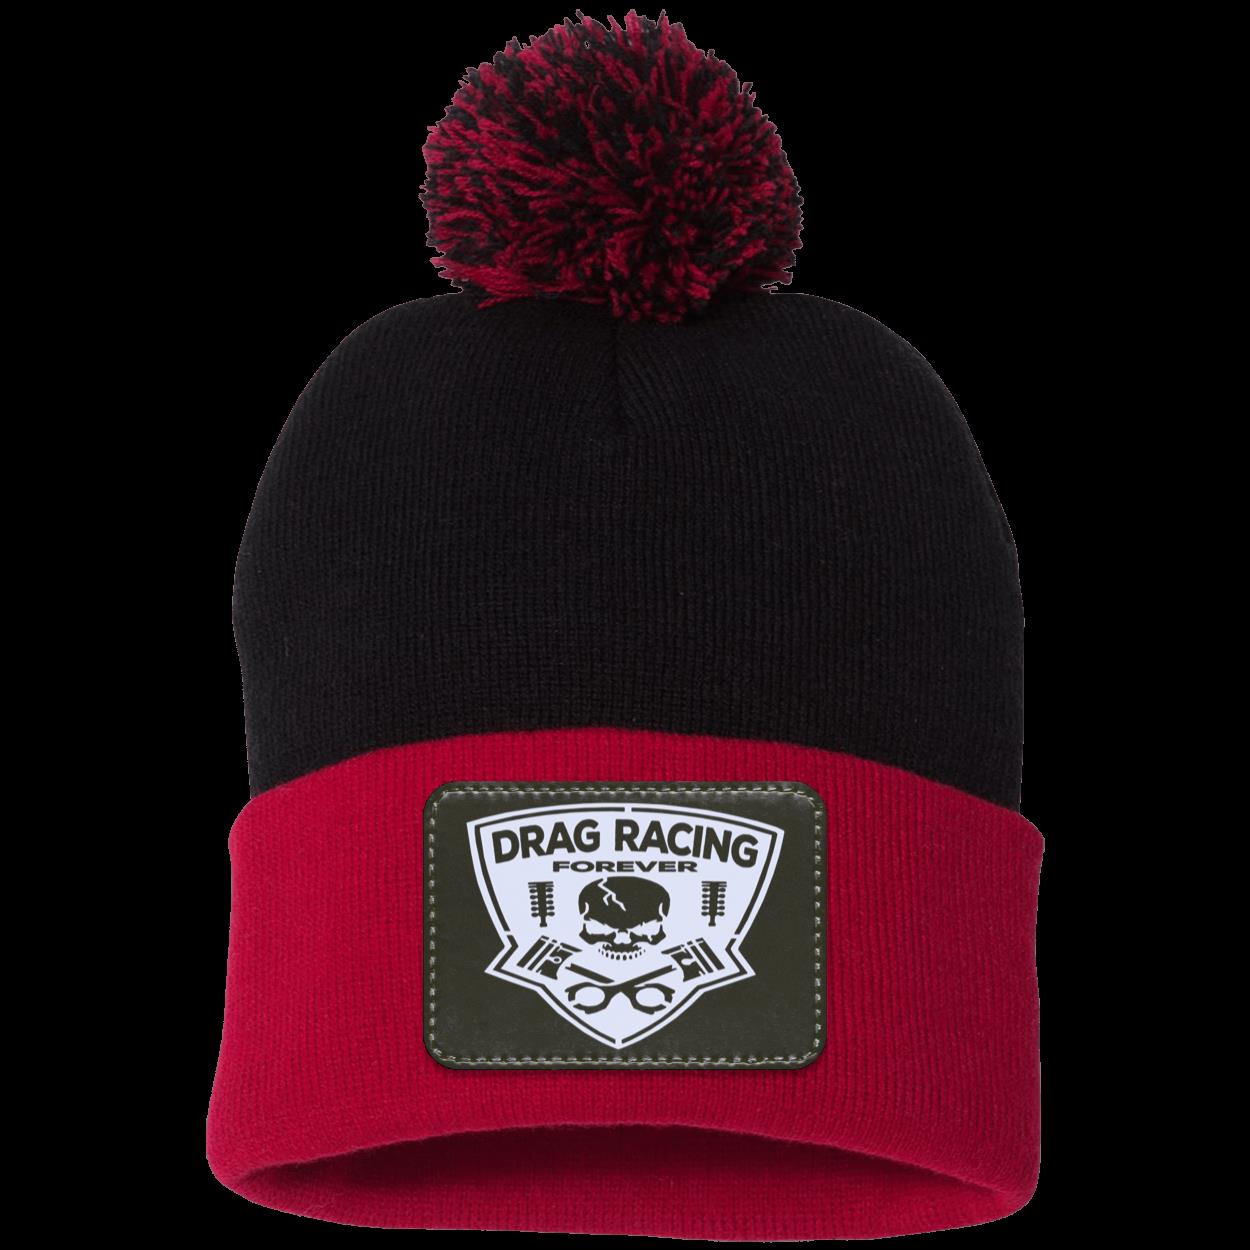 Drag Racing Forever Patched Pom Pom Knit Cap